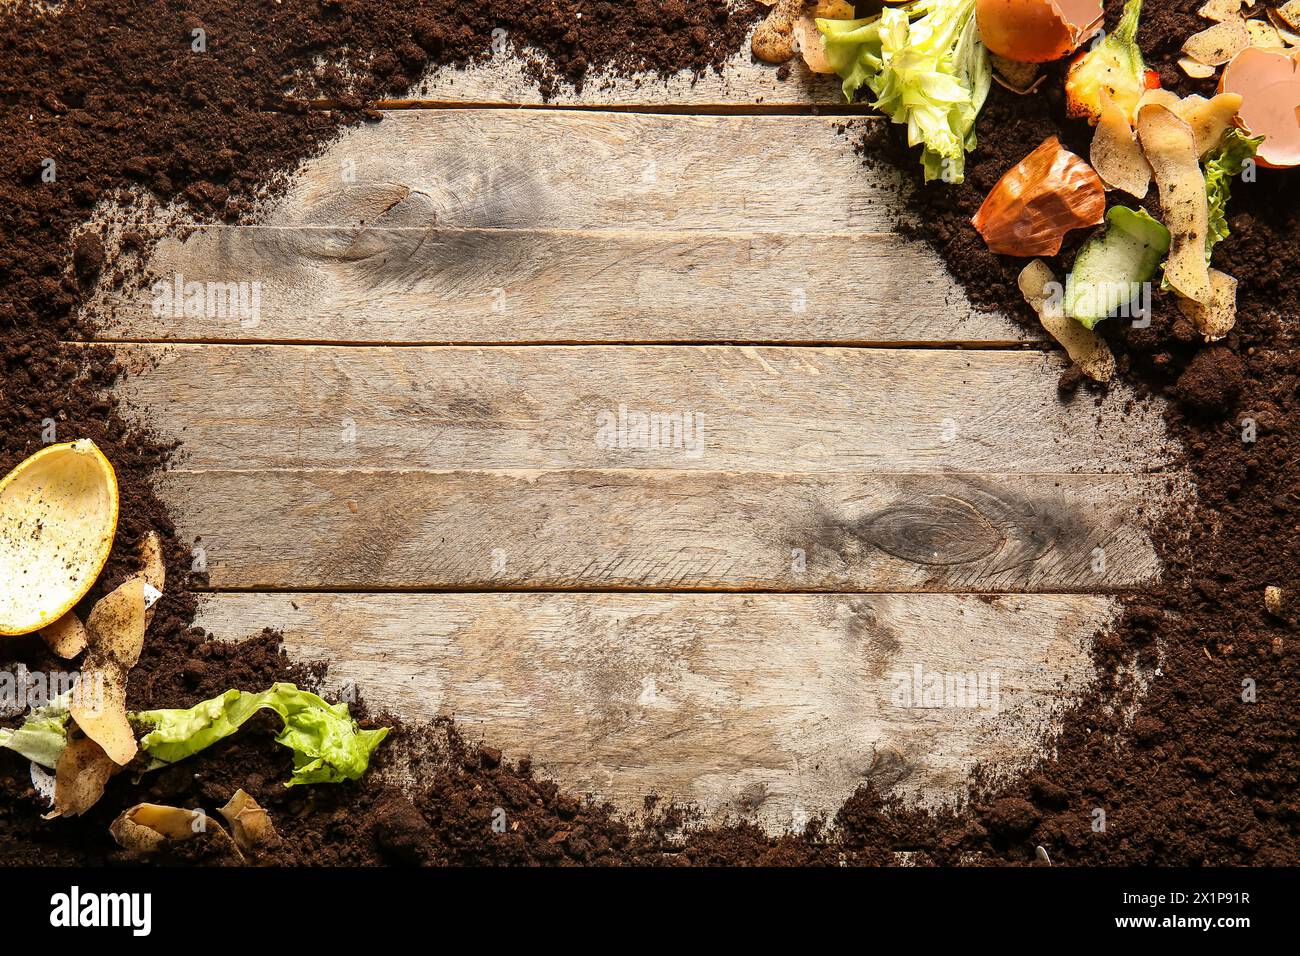 Frame made from organic waste and soil on wooden background. Compost recycling concept Stock Photo